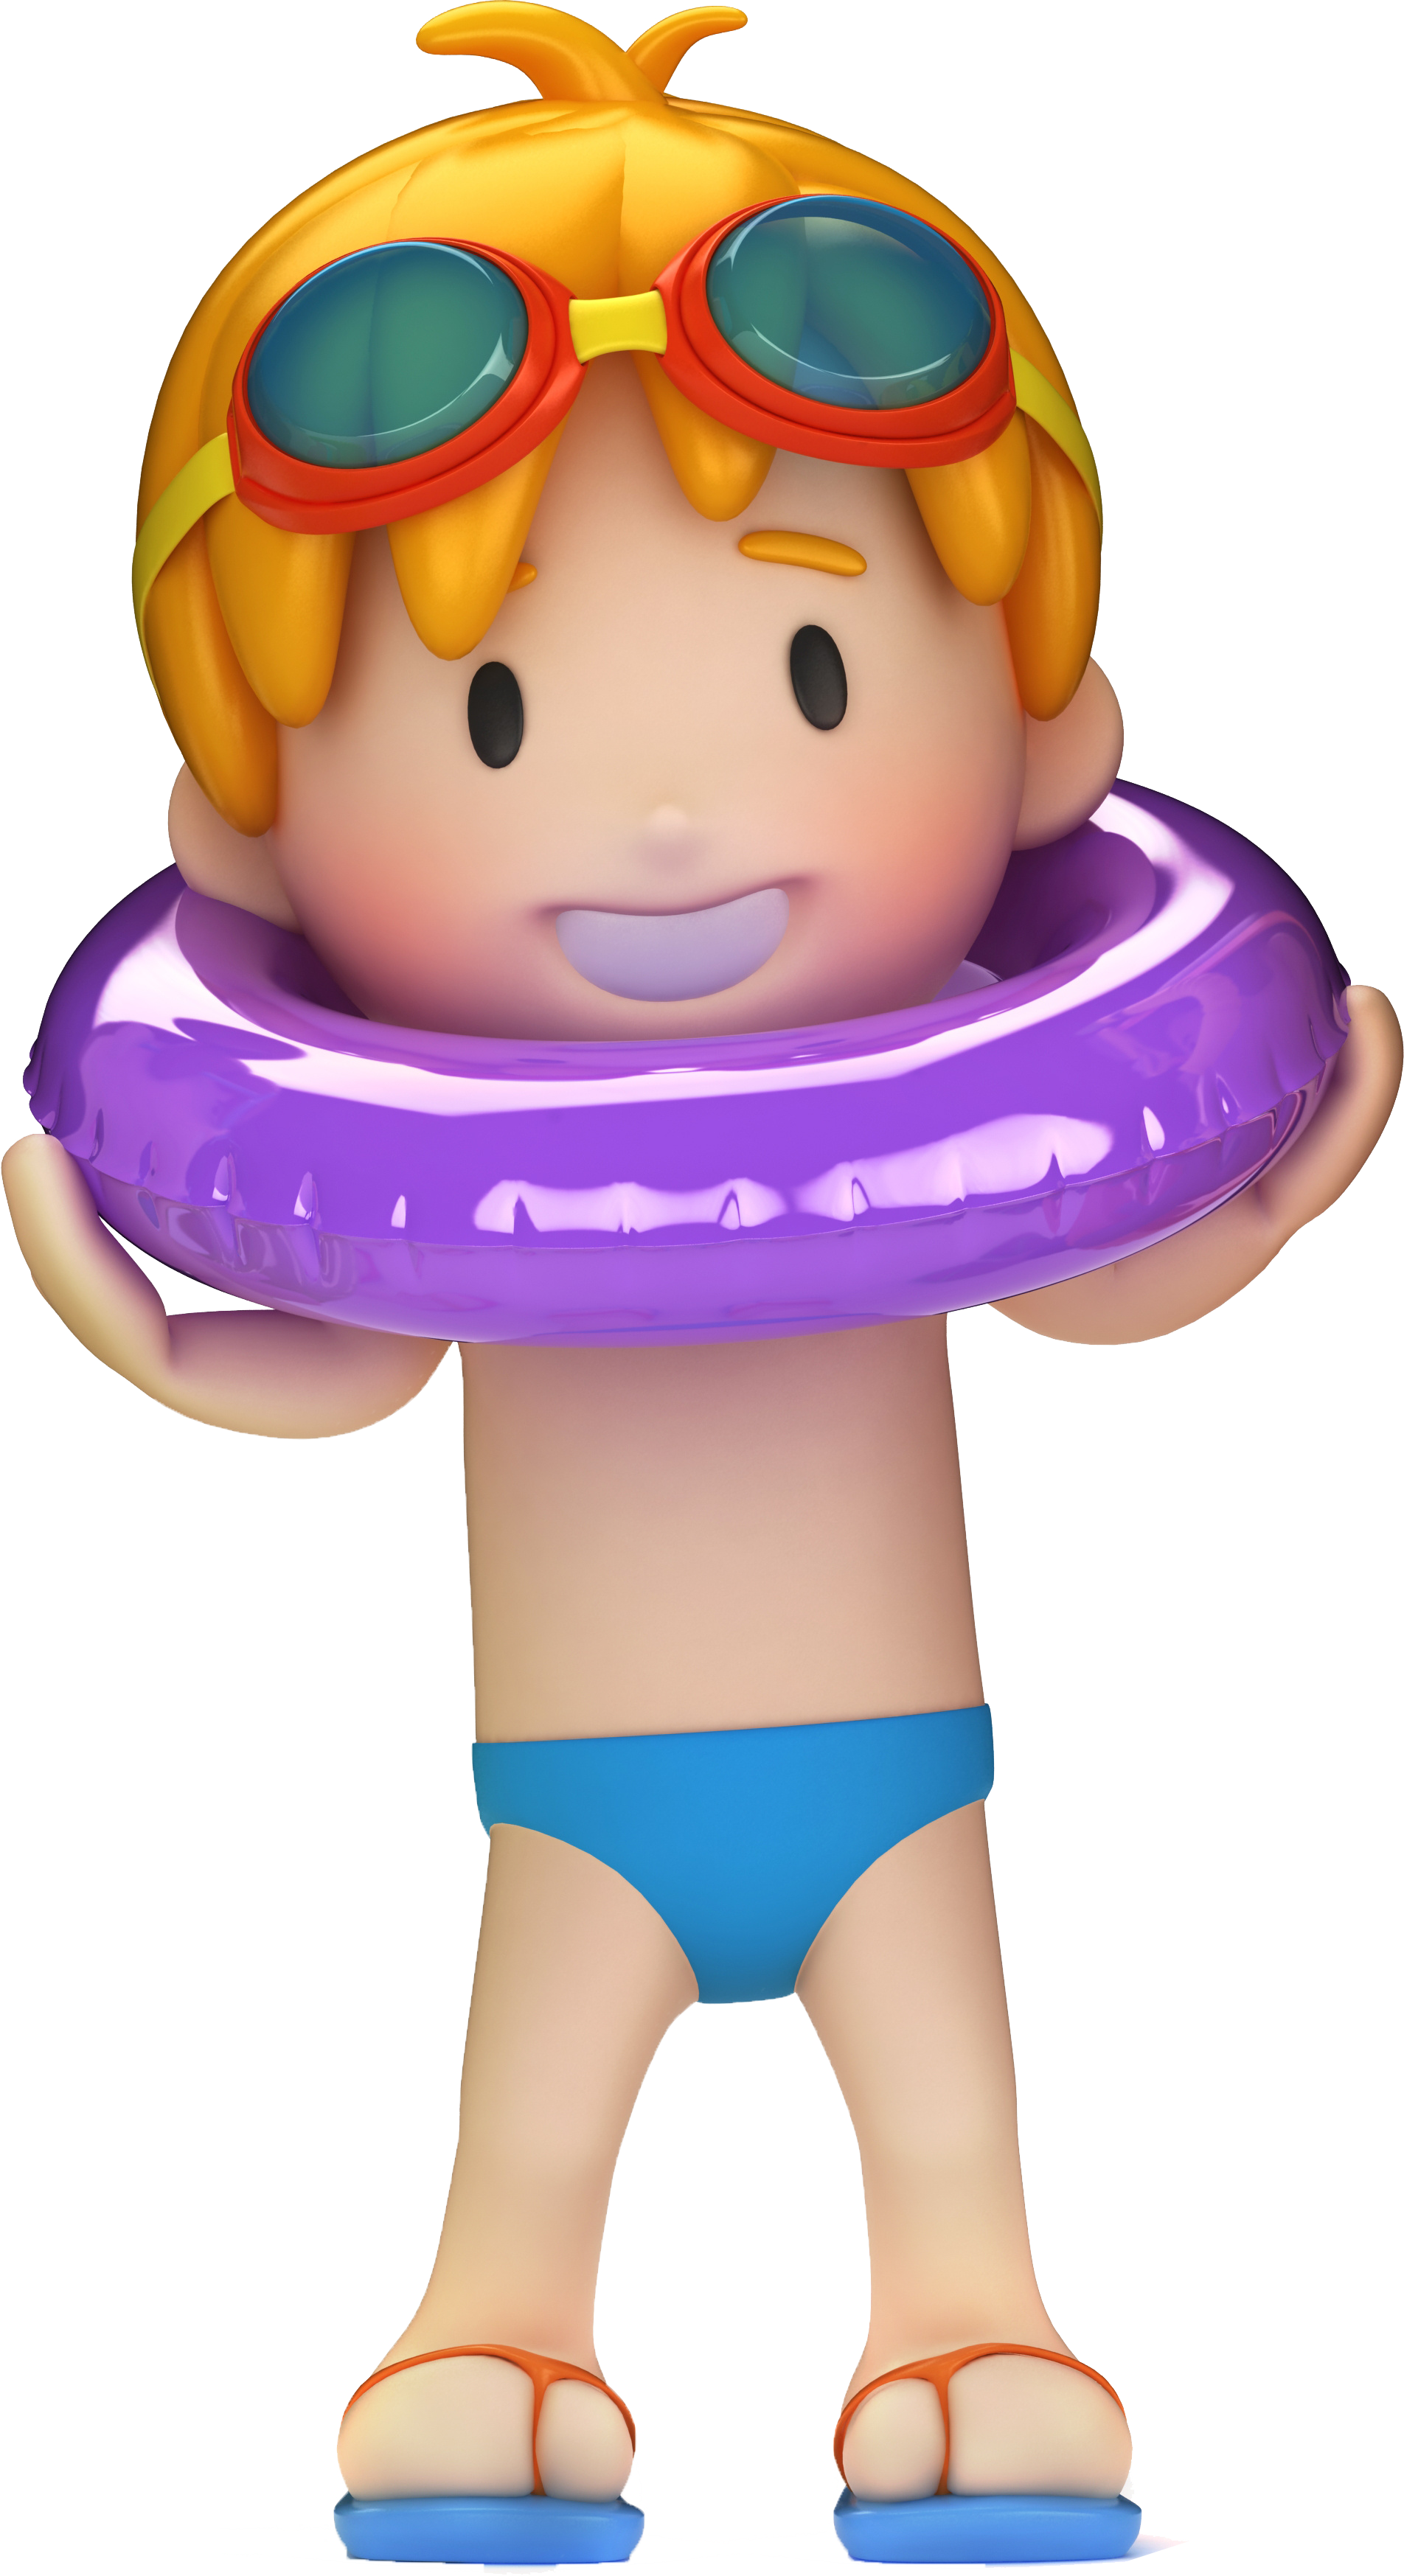 Goggles clipart swimming sport. Cartoon child d baby